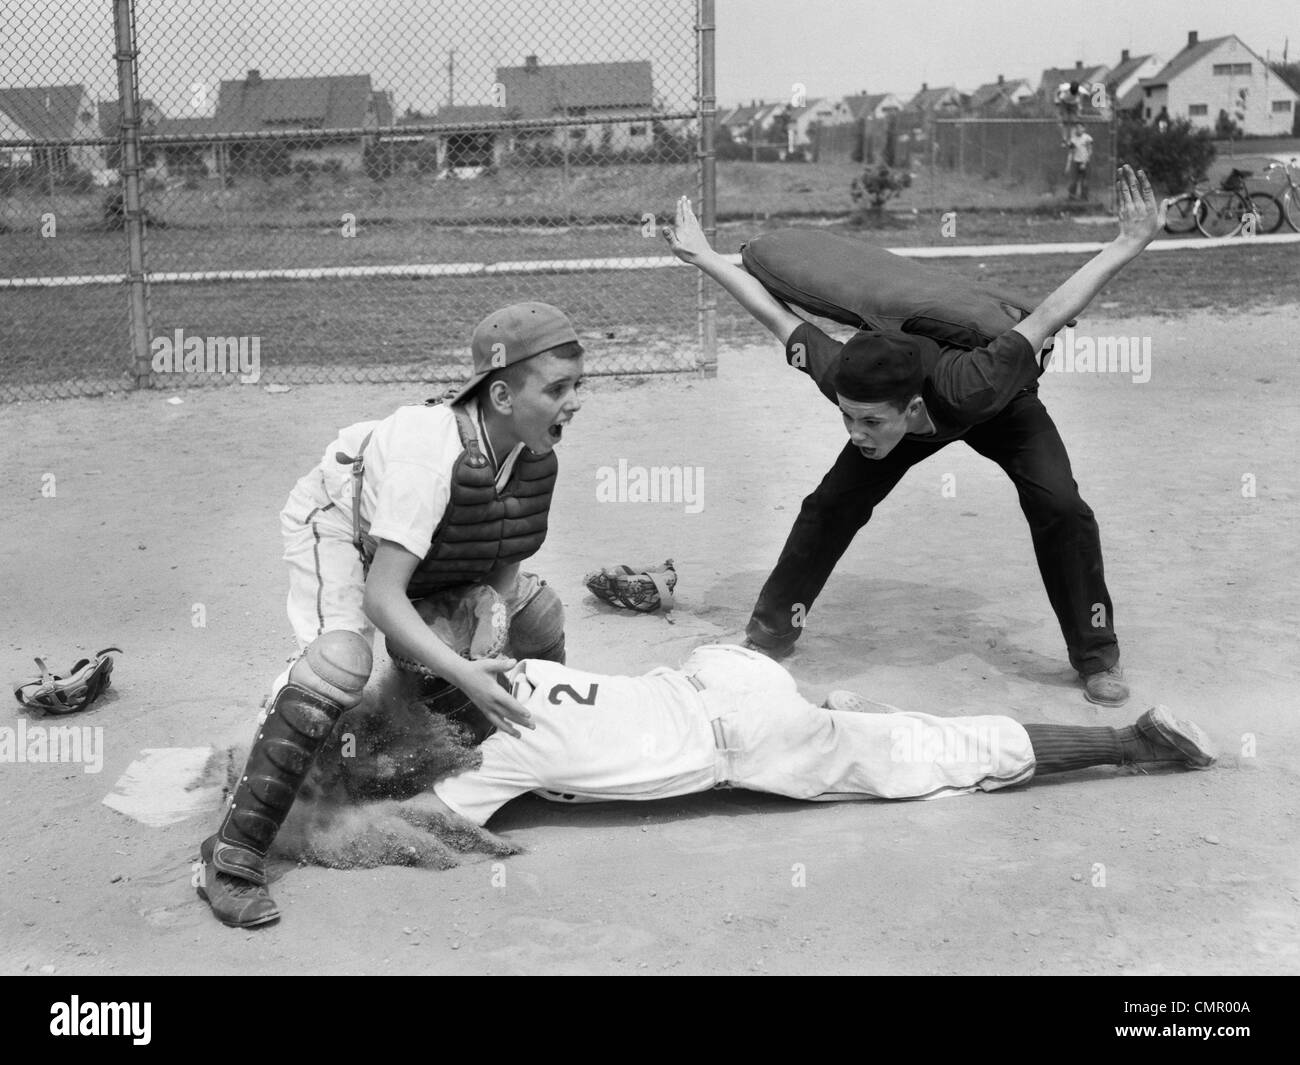 1950s LITTLE LEAGUE UMPIRE CALLING SAFE PLAYER SLIDING INTO HOME PLATE Stock Photo